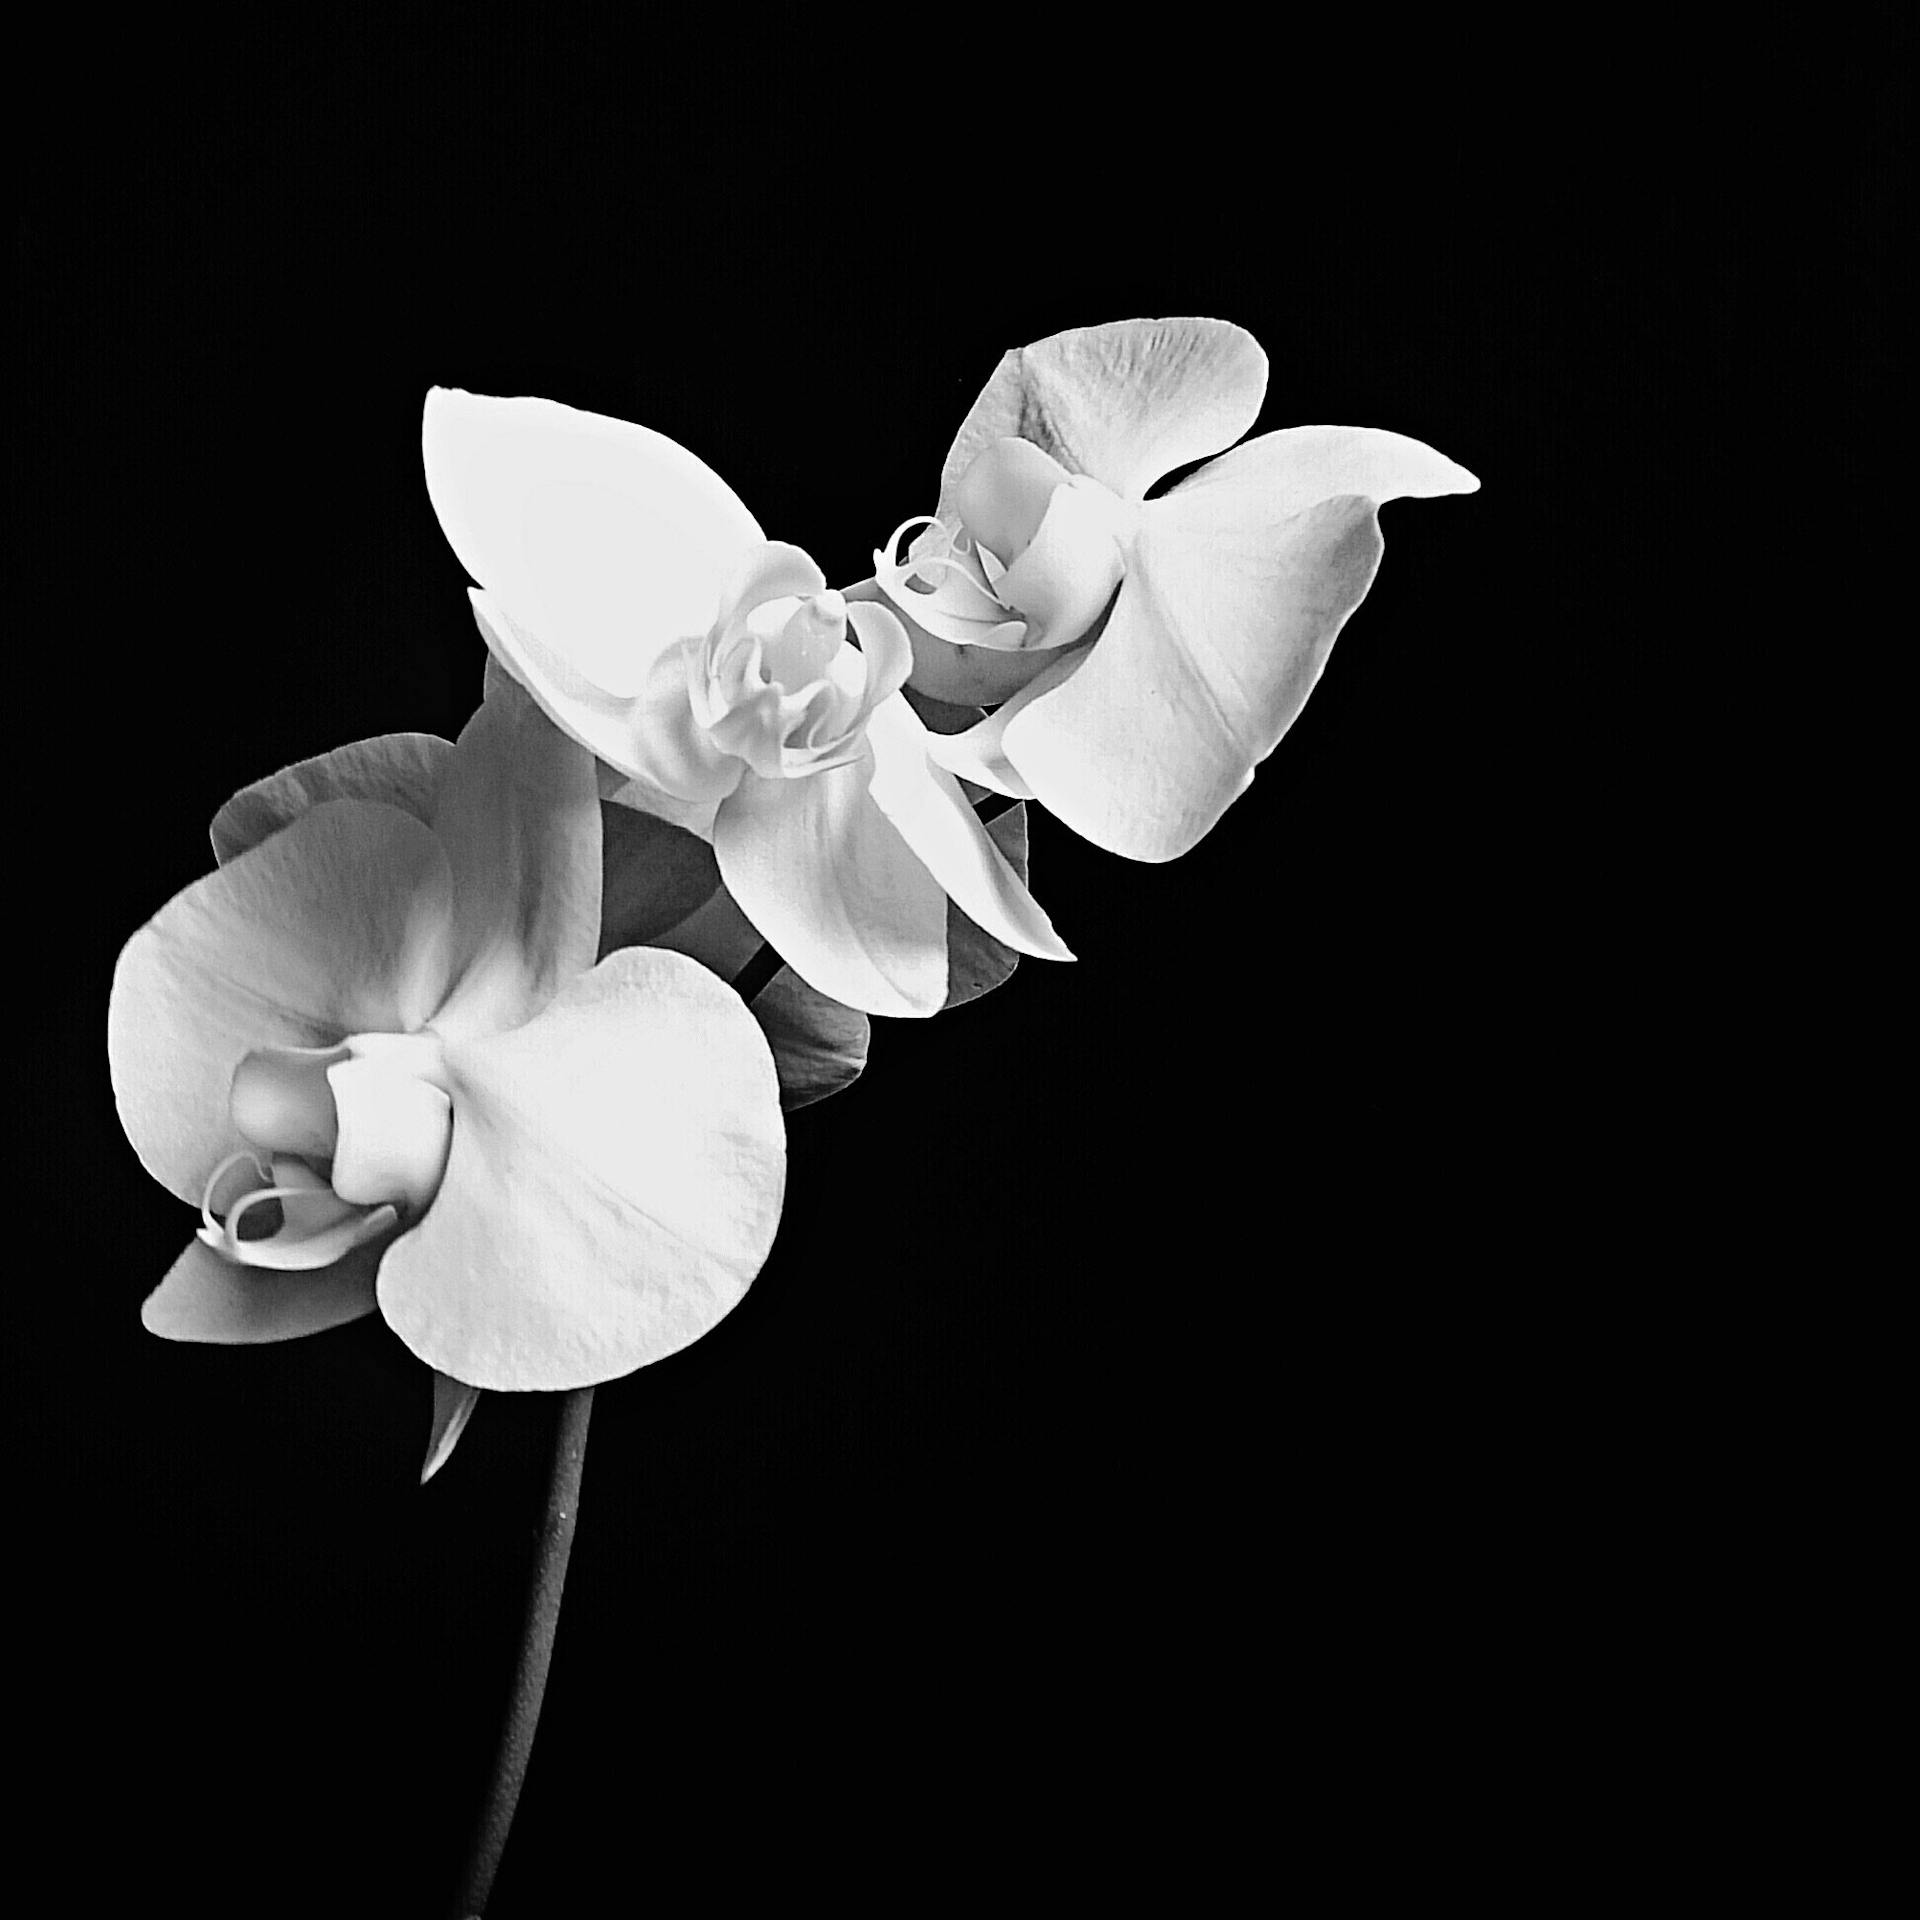 Three white flowers blossom from a single stem against a black background